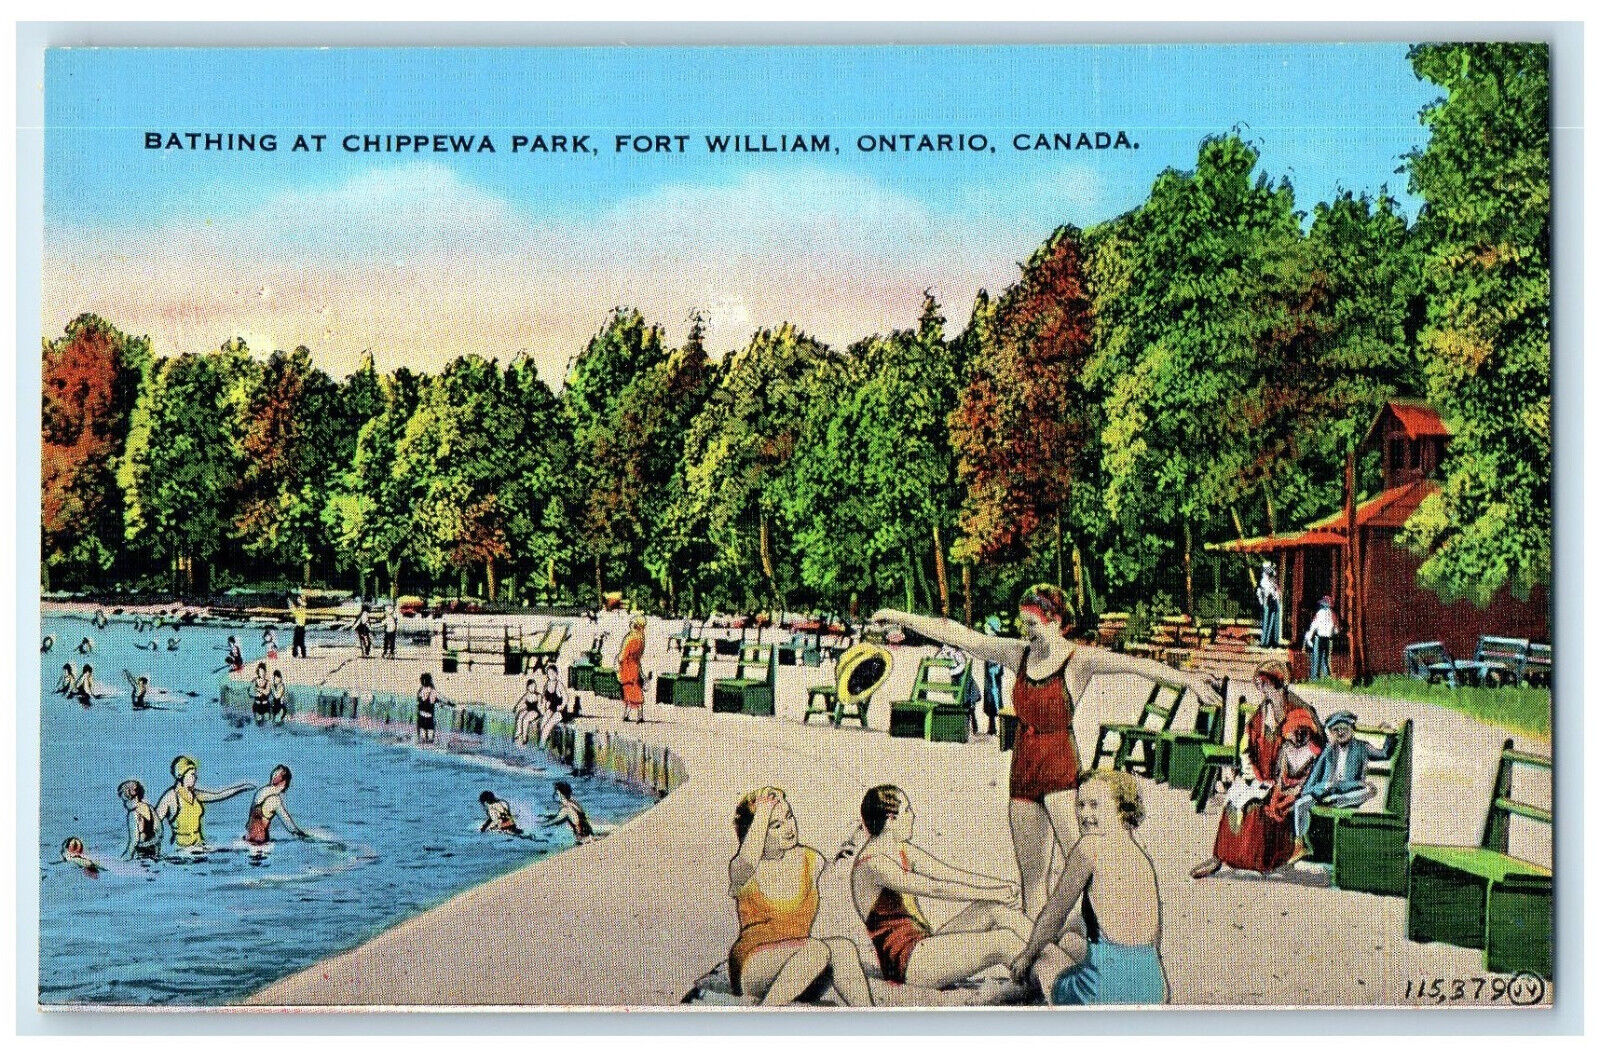 c1950's Bathing at Chippewa Park Fort William Ontario Canada Postcard